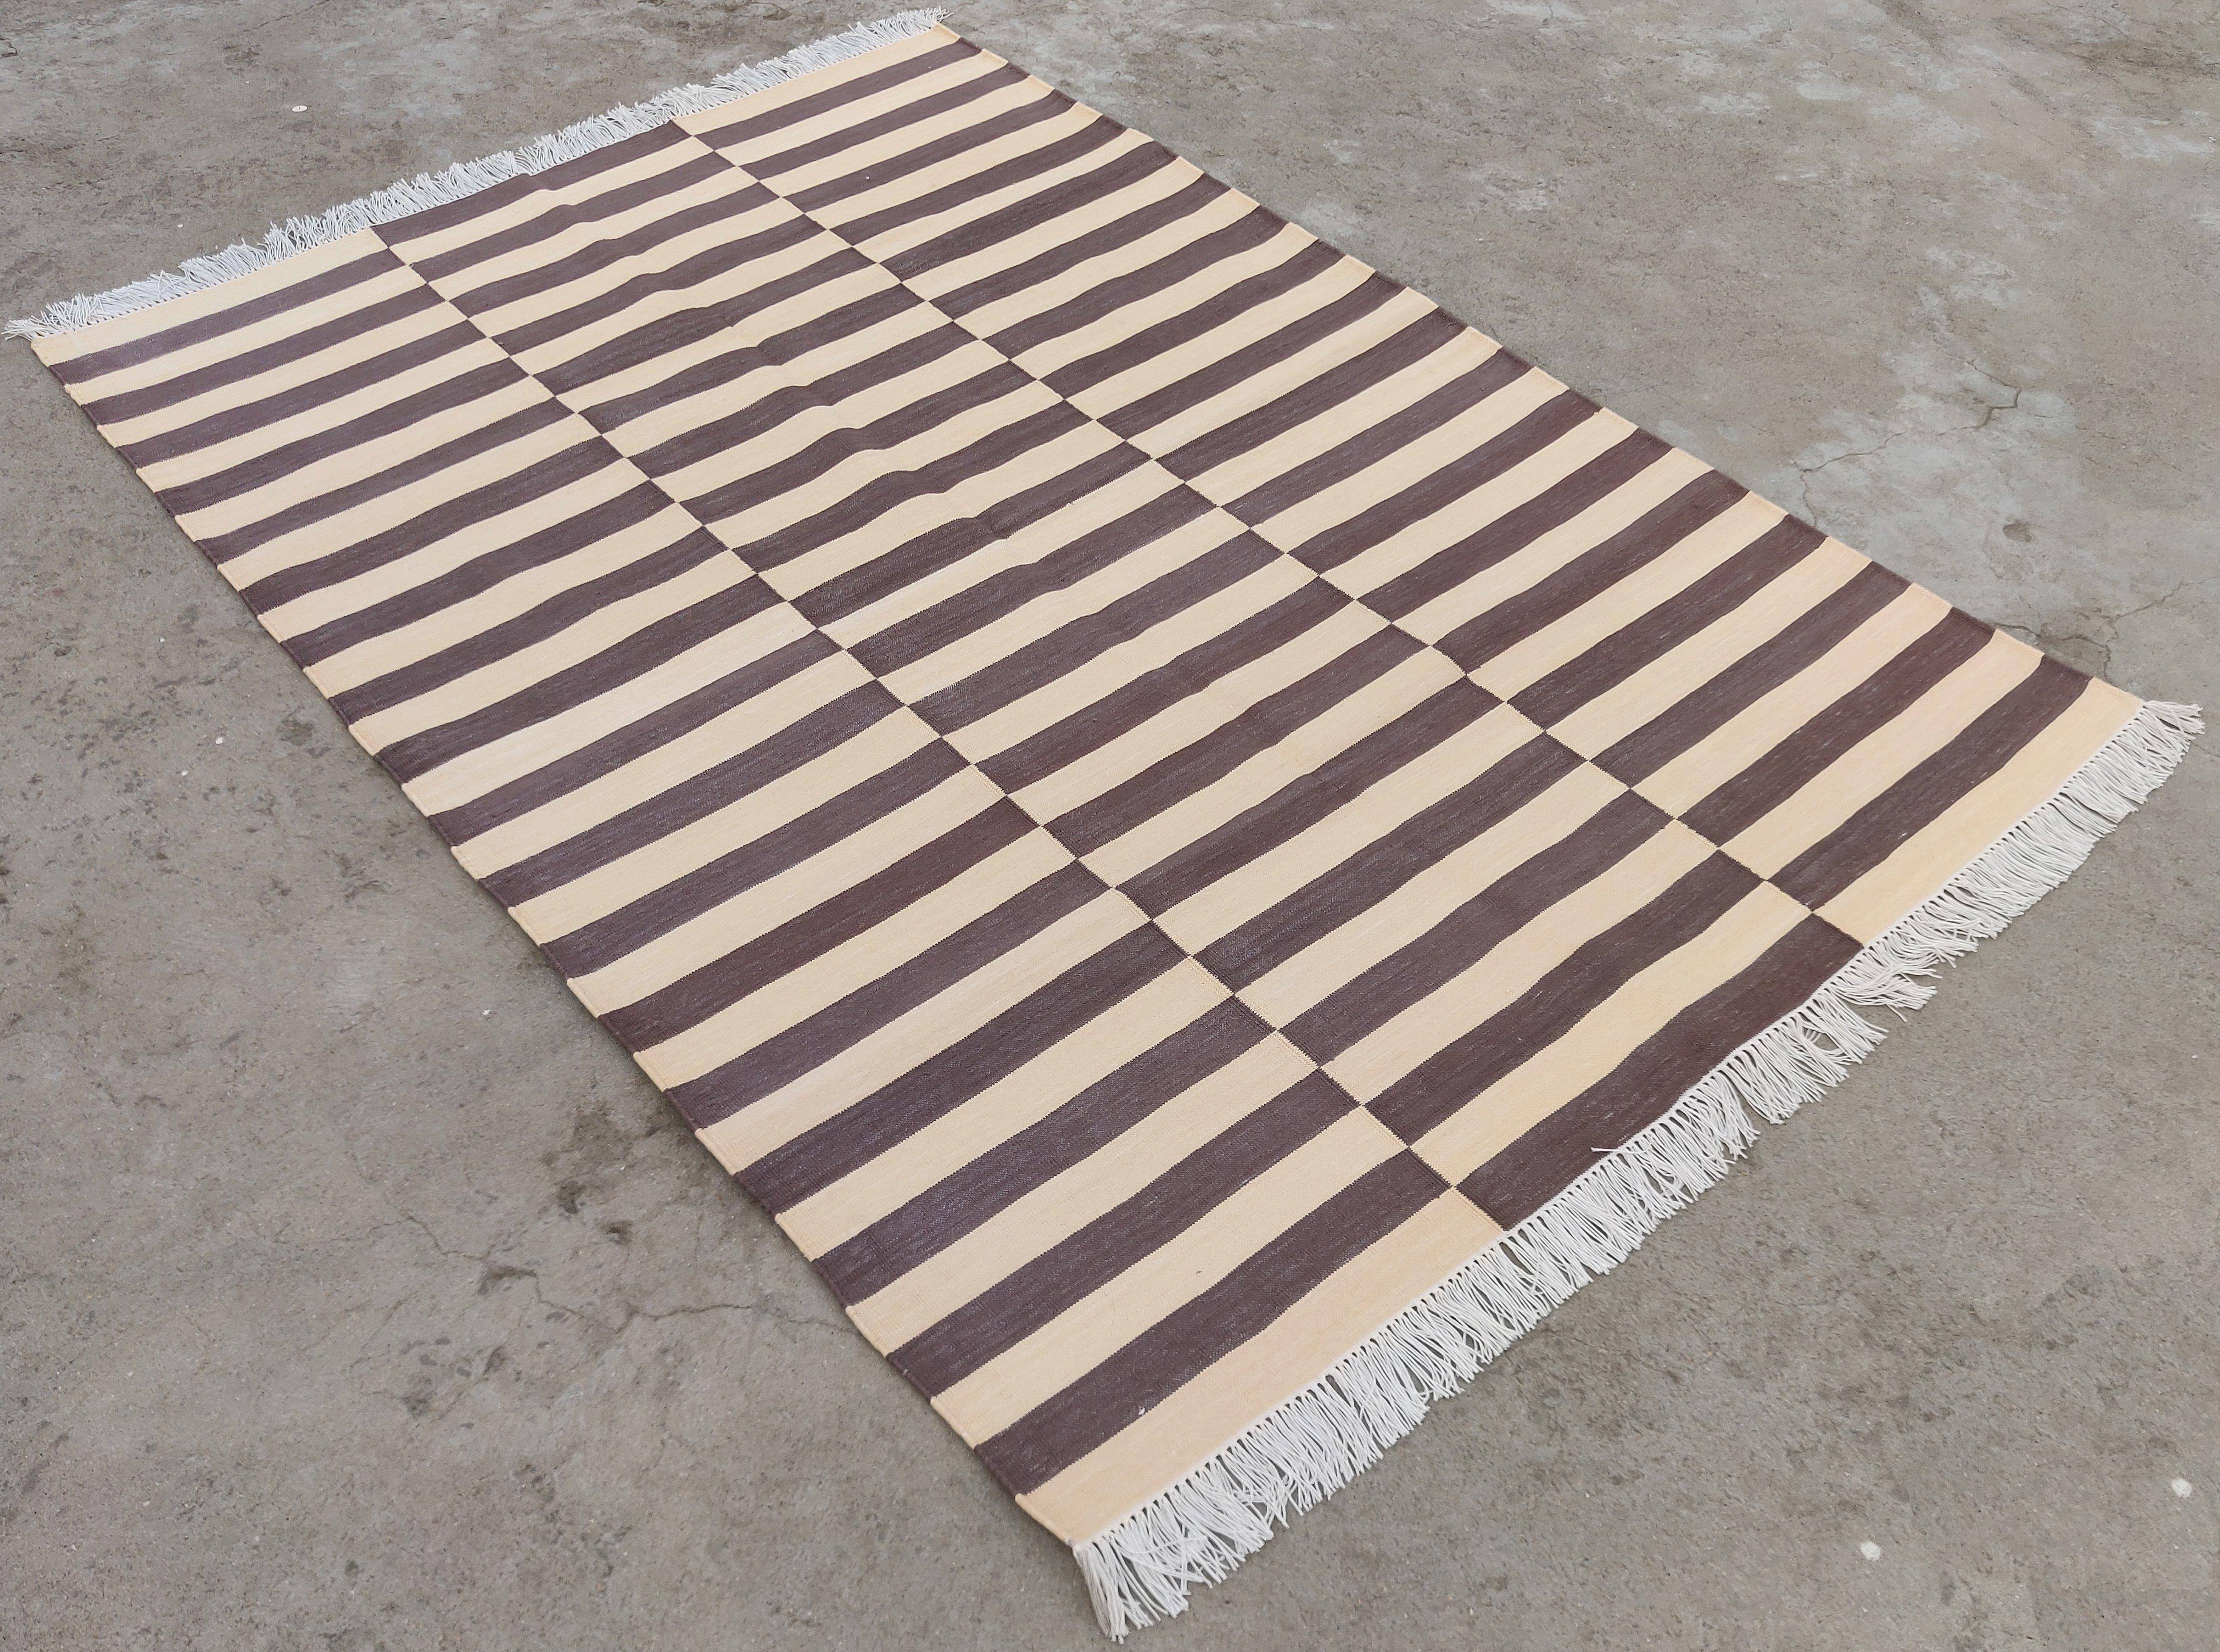 Cotton Vegetable Dyed Coffee Brown and Beige Striped Indian Dhurrie Rug-4'x6' 

These special flat-weave dhurries are hand-woven with 15 ply 100% cotton yarn. Due to the special manufacturing techniques used to create our rugs, the size and color of